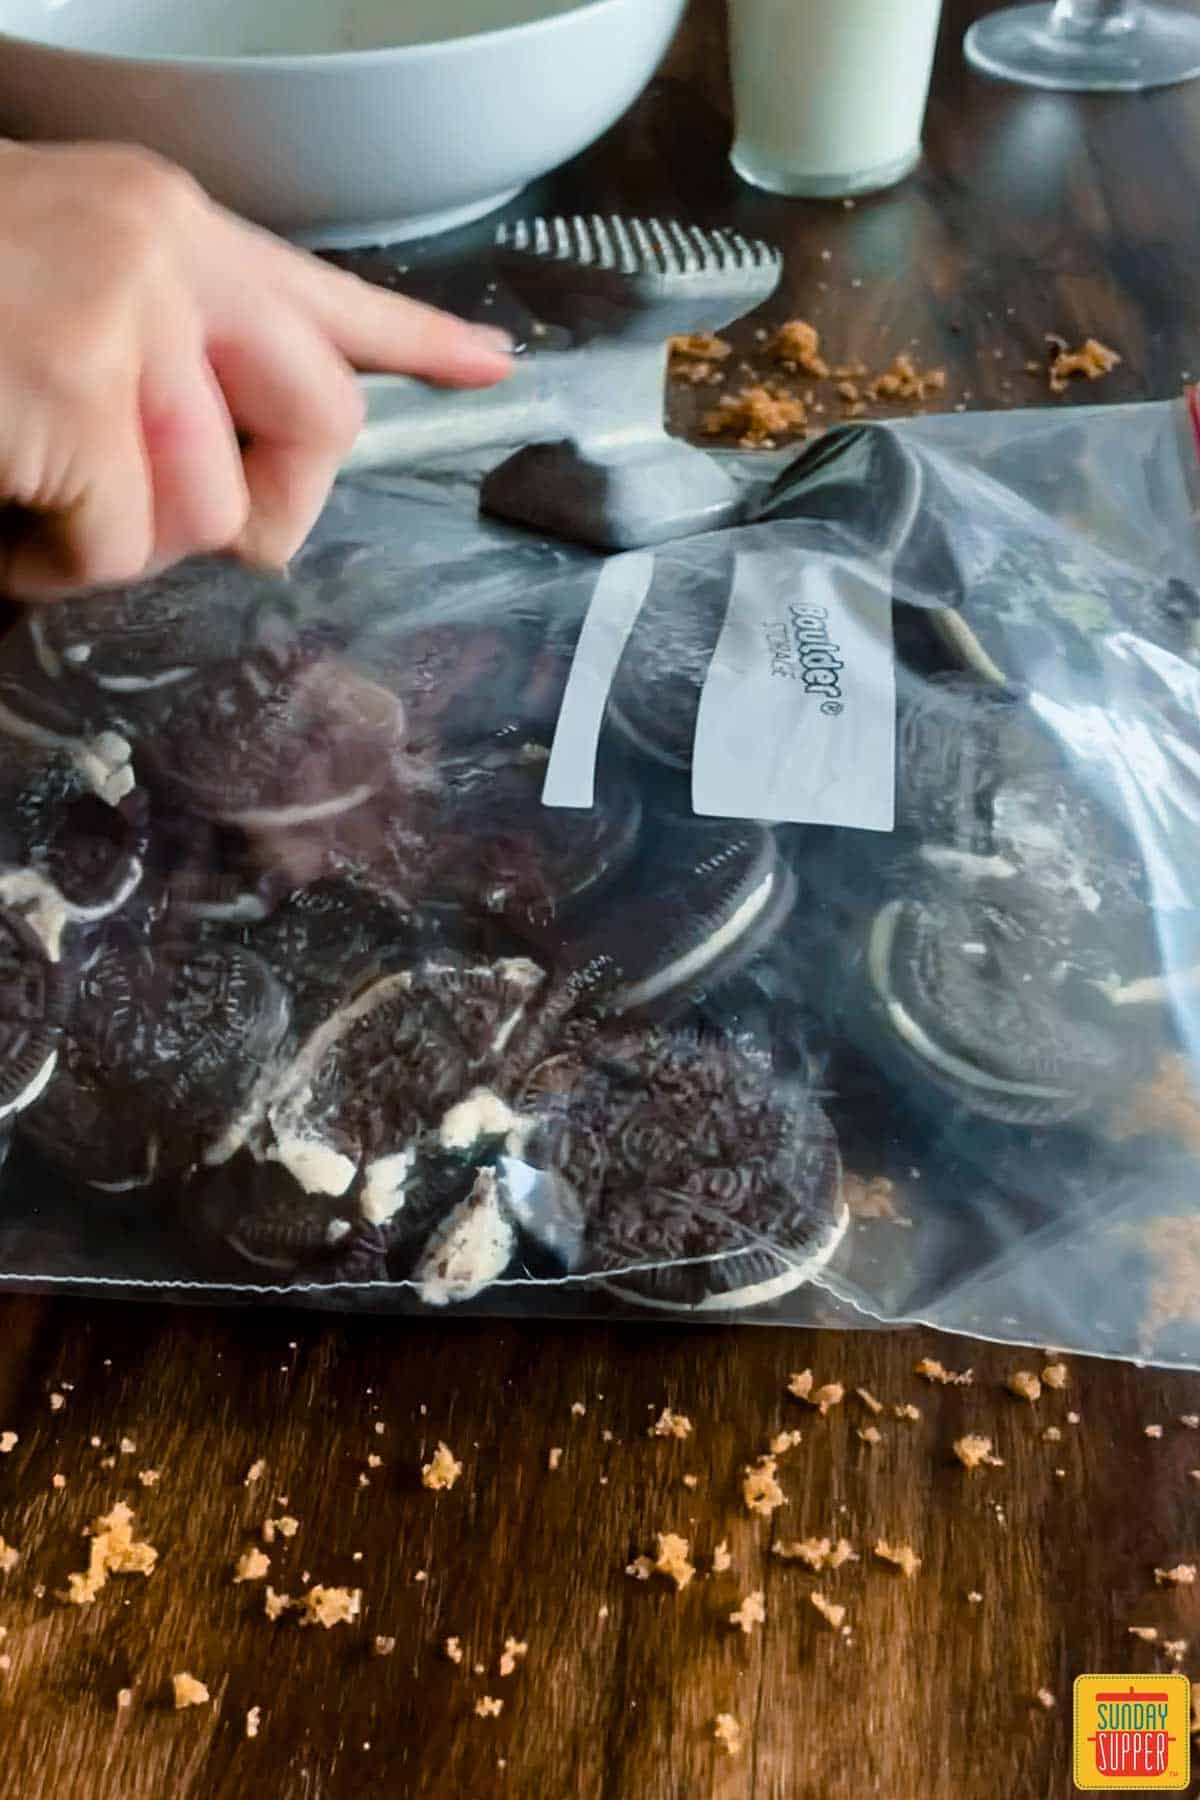 Pounding oreo cookies into small pieces in a bag